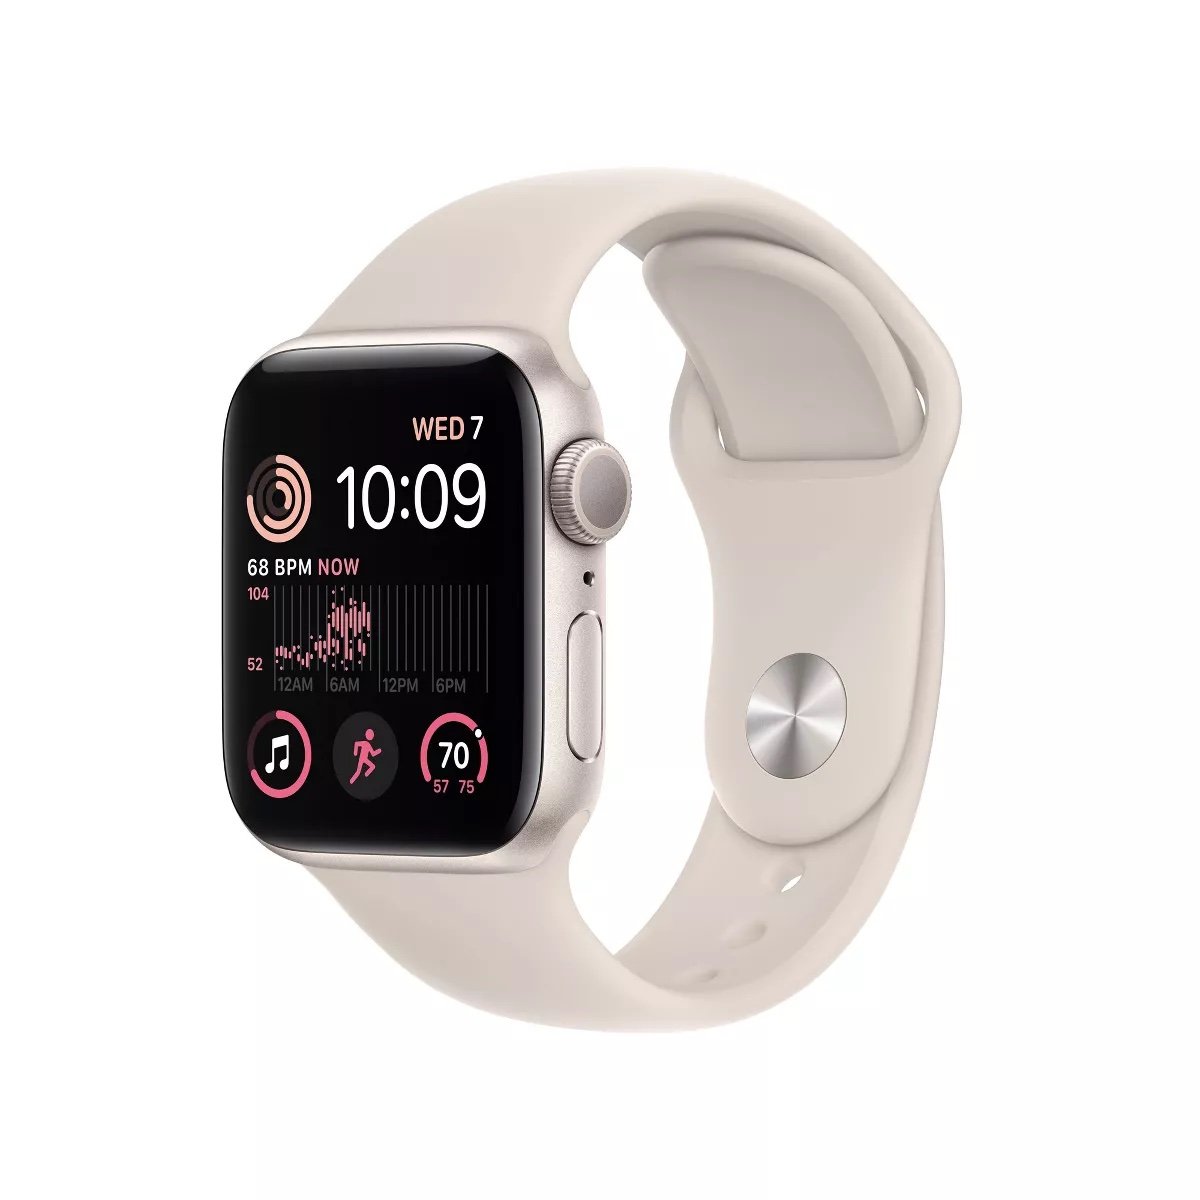 Save up to $60 on Apple Watch